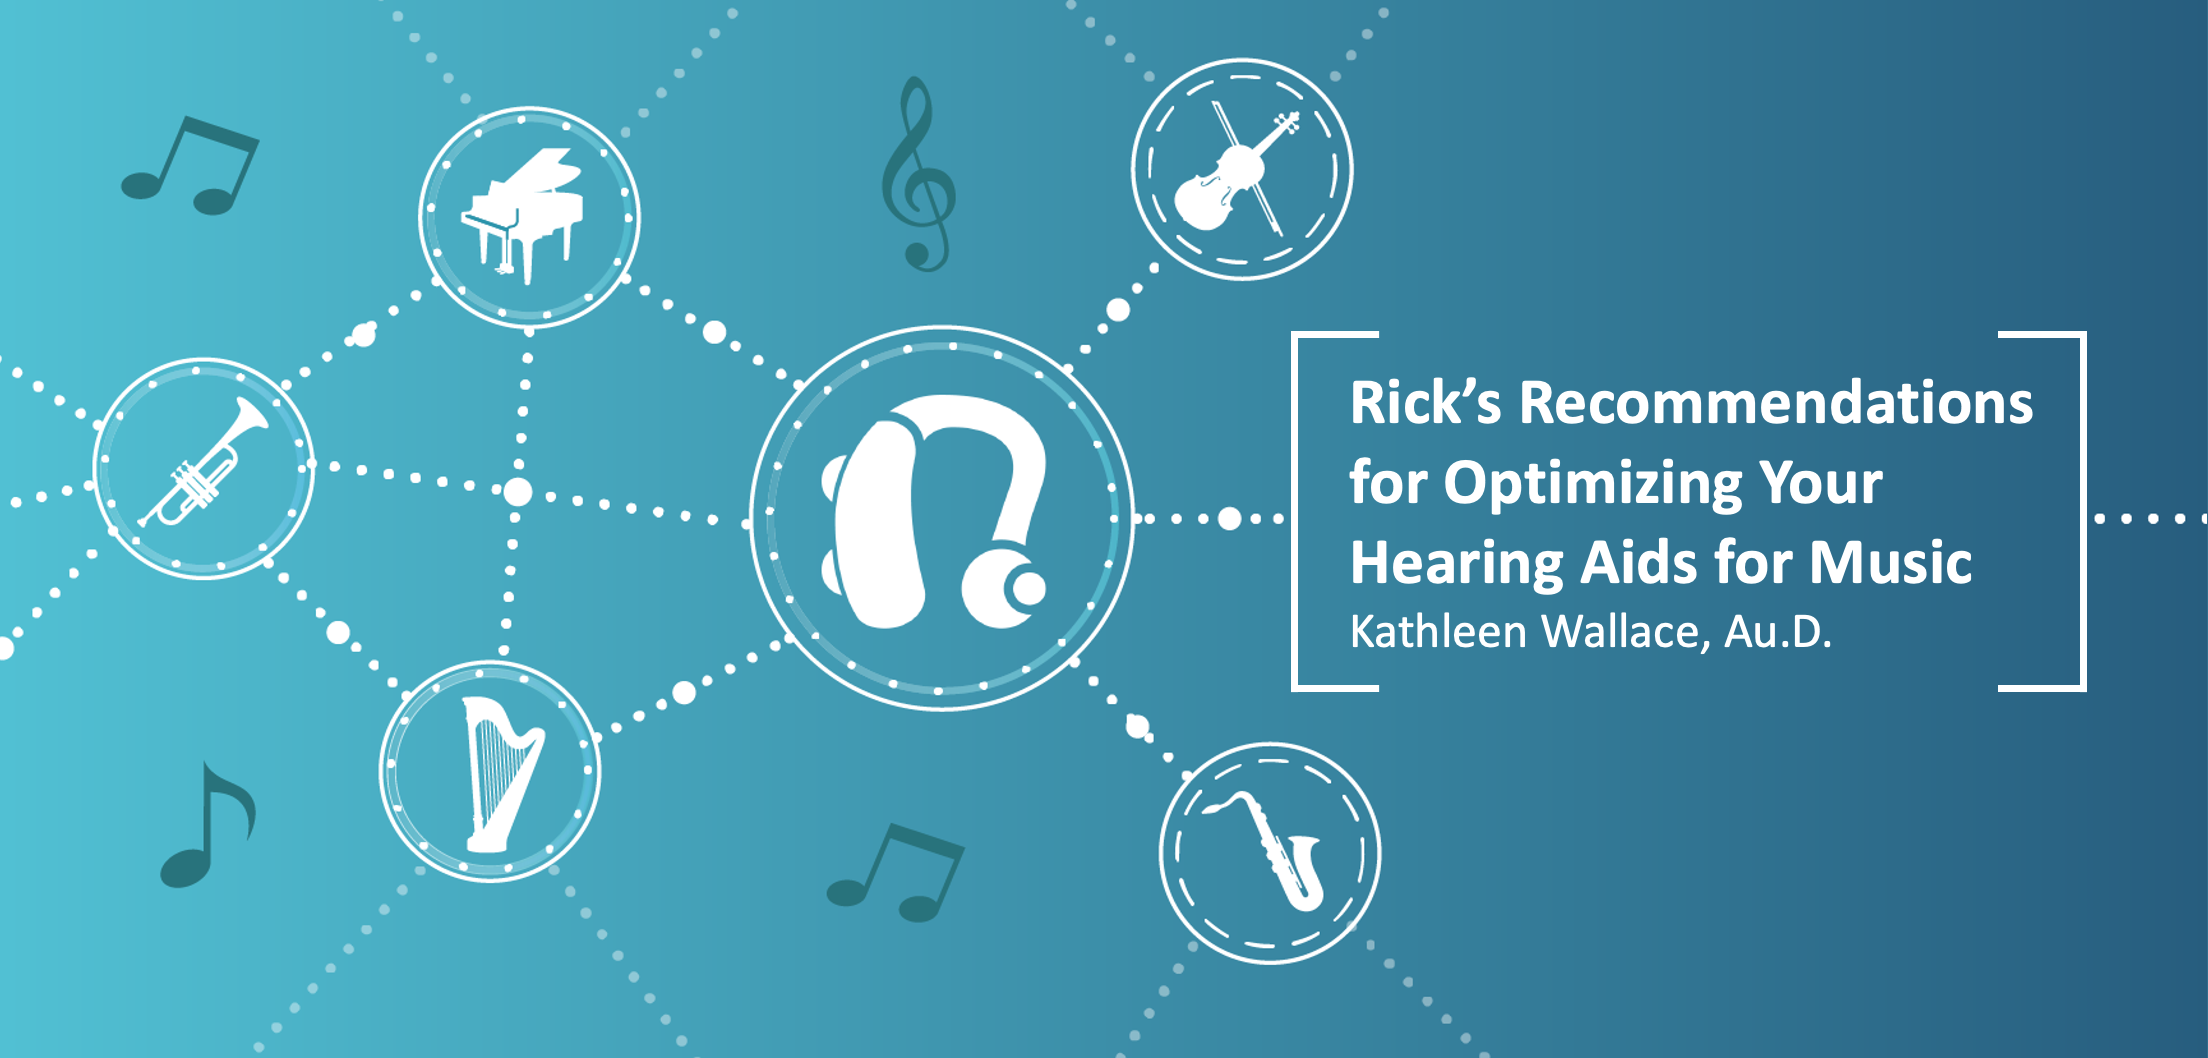 Rick’s Recommendations for Optimizing Your Hearing Aids for Music By: Kathleen Wallace, Au.D. Musicians often require in-depth hearing aid programming. Hearing aids, by design, prioritize understanding speech and reducing background noise. Music, however, requires more of an unmodified, full range approach, like that of audio production. Musicians want to experience the full, unfiltered dynamic range of instruments and voice. In essence, musicians with hearing loss want music to still sound like music. As part of our series on how to customize your hearing aids for playing and performing music, Grand Piano Passion brings you the perspective of Rick Ledbetter- musician, audio engineer, and hearing aid / cochlear implant user- on how he programs his hearing aids for music. Step One: Find An Audiologist who Performs Real-Ear Measurements What to do at home: Take the time to research an audiologist that is best for your needs. Locate an audiologist that consistently performs real-ear measurements as part of their practice and ideally has experience working with musicians. An audiologist who has high-fidelity speakers in their office is a bonus, as discussed in Step Three below. What to tell your audiologist: When making the appointment, request that real-ear measurements be performed. Here’s why: Real ear measurements customize your programming to the shape and acoustics of your specific ear canals. Audiologists appreciate a heads-up when scheduling to allow for ample time for these adjustments to be performed. Step Two: Request Real-Ear Measurements and Specific Adjustments What to tell your audiologist: First, perform real-ear measurements on both ears and make in-situ adjustments. Ensure sound processing is off and release time is set to fast or syllabic prior to running real-ear measurements. Here’s why: In-situ adjustments, made with the hearing aids in your ears, fine-tune your hearing aid programming to the unique shape of your ear canal. This ensures that the sound delivered to your ear canal matches the programming suited for your specific hearing loss. What to tell your audiologist: Increase the maximum power output (MPO) of frequencies below 500 Hz by about 4dB. In order to allow for such gain in the lower frequencies, you will need to make sure you have a ‘closed fit’, either through domes or earmolds. Here’s why: Hearing aids place a strong emphasis on frequencies, or pitches, present in speech (particularly 1000Hz through 4000 Hz in audiologist parlance), yet music requires a far broader range of frequencies. By making lower-pitched sounds louder, you will experience more bass and a fuller sound. Hearing aid domes with holes allow some natural sound to filter through to the ear canal, but these so called ‘open-fit’ hearing aids can also allow lower pitched sounds to leak out, complicating the goal of amplifying the lower pitches. The solution is to close off the ear canal using a dome that does not have any holes, called a ‘closed fit.’ If you are in an ‘open fit’, ask your audiologist about switching to a ‘closed fit.’ The risk of the closed-fit approach is that your voice may sound louder to yourself, a phenomenon audiologists call ‘occlusion’. Ask your audiologist to work with you to find the right earmold for your desired sound quality. Step Three: Test the Setting In Office What to tell your audiologist: If your audiologist has high fidelity speakers, request to listen to music in the office to check your programming. While recorded music varies slightly from live music due to compression, it will provide a good estimation of the accuracy of your programming. For best results, listen to familiar songs at live music levels to be able to identify potential sound quality issues more easily. Here’s why: By immediately testing the programming with familiar music, you can quickly assess if the programming sounds true to your memory or if more adjustments are immediately needed. Step Four: Fine-Tune Settings After Testing with a Piano What to do at home: Prior to your next appointment, sit down at a piano, playing one note at a time. Consider how each pitch sounds, particularly whether some notes are louder or softer than others. Record this information on a “pitch to frequency” chart (free versions may be found on the Internet by searching for “free pitch to frequency chart”). Conduct the same process with chords. What to tell your audiologist: Share these findings and ask for programming changes accordingly, requesting any changes be made only one step size in gain at a time. Here’s why: Making micro-programming changes to each specific pitch will assure a more balanced and purer music listening experience. Musicians generally have very sensitive ears and very good critical listening skills. Grand Piano Passion would like to hear from you. How was your experience in working with your audiologist to implement this checklist?